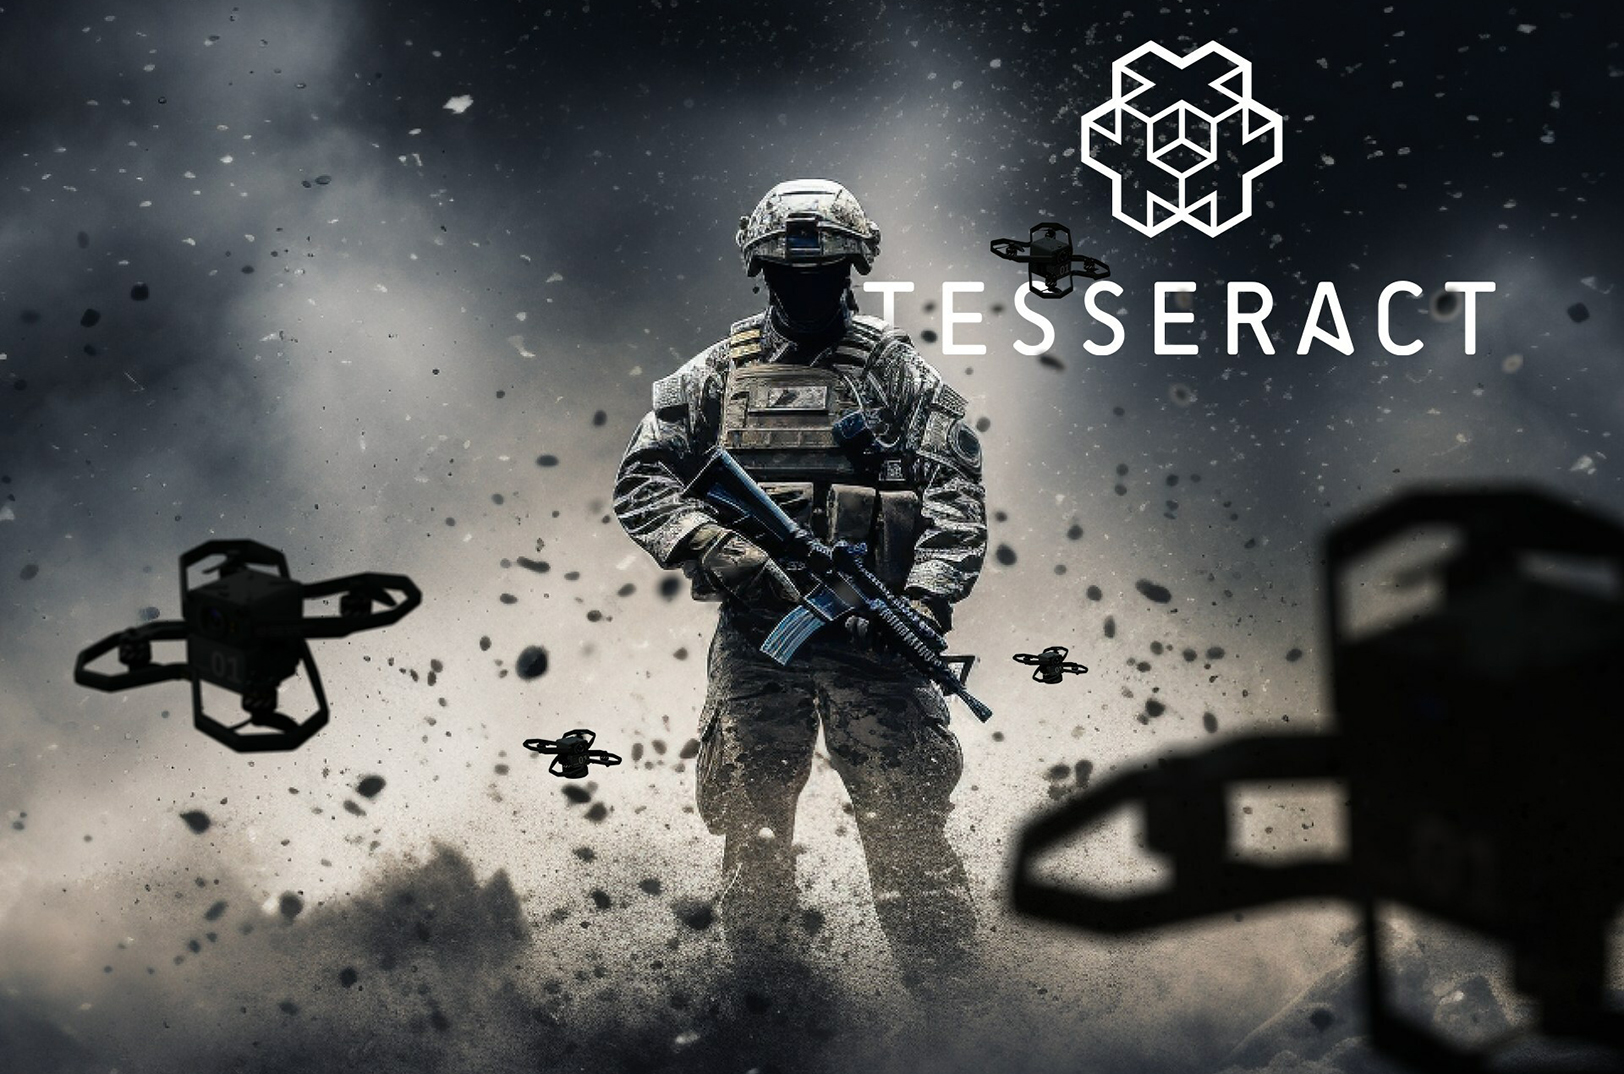 Tesseract Ventures developing SWARM drone technology for US Special Operations Forces